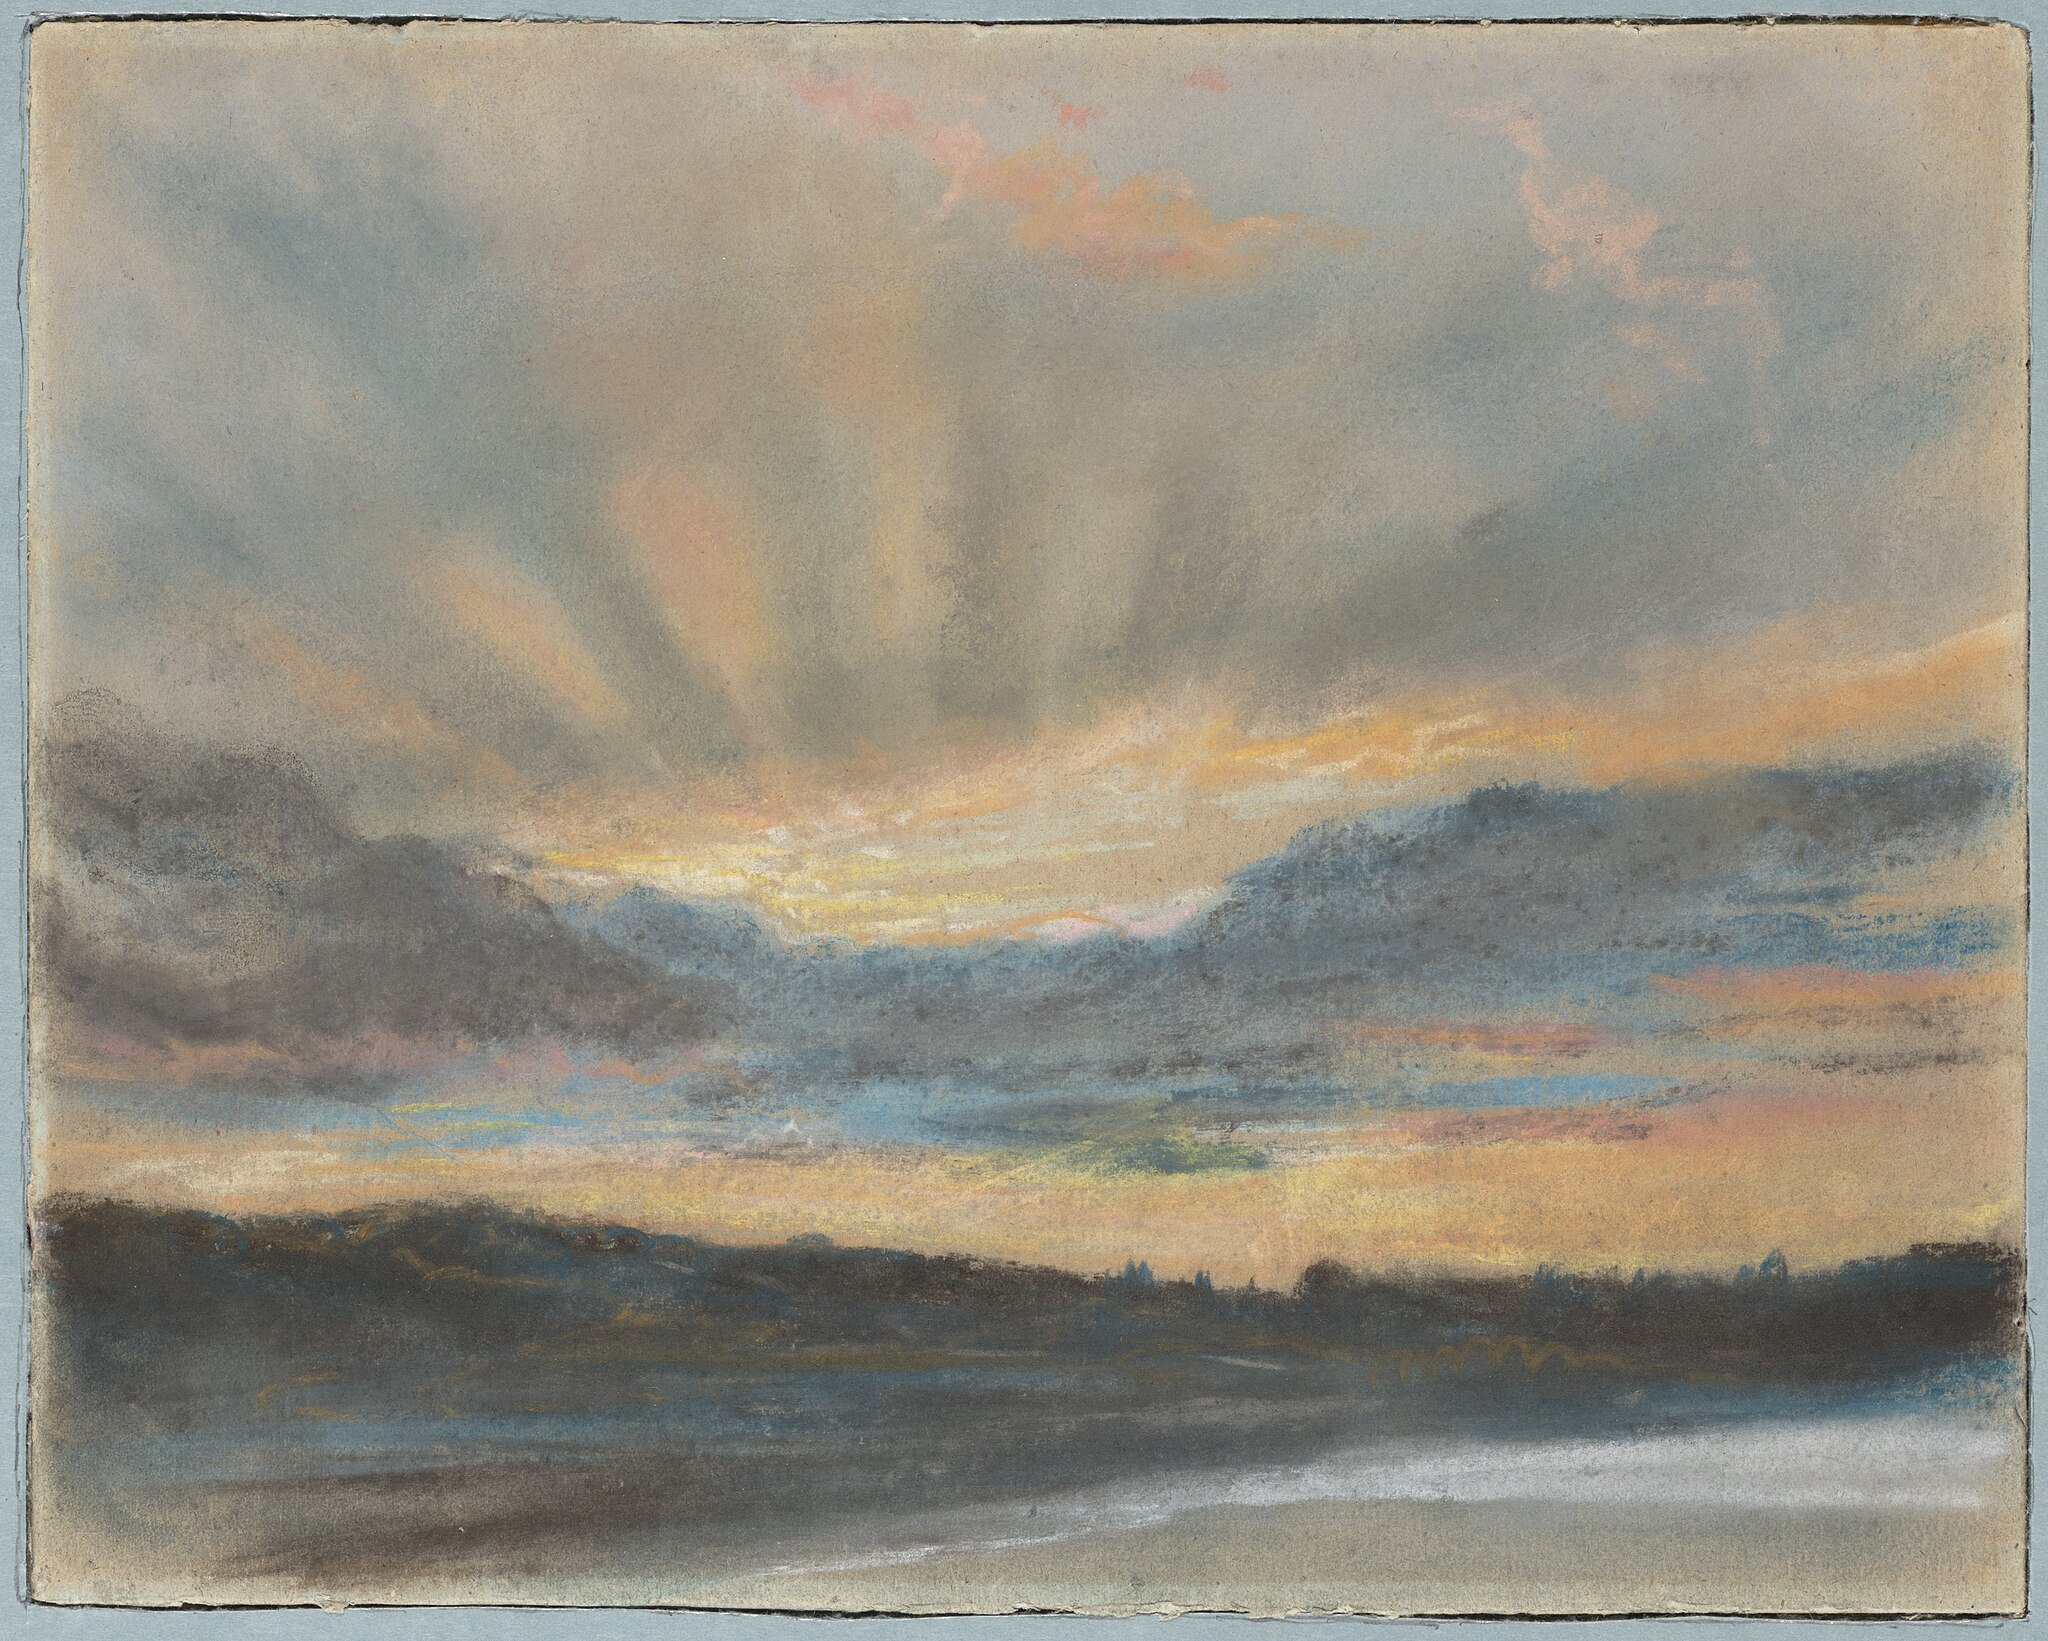 A pastel artwork depicting a sunset with rays of light streaming through clouds over a calm landscape with dark silhouetted trees on the horizon.